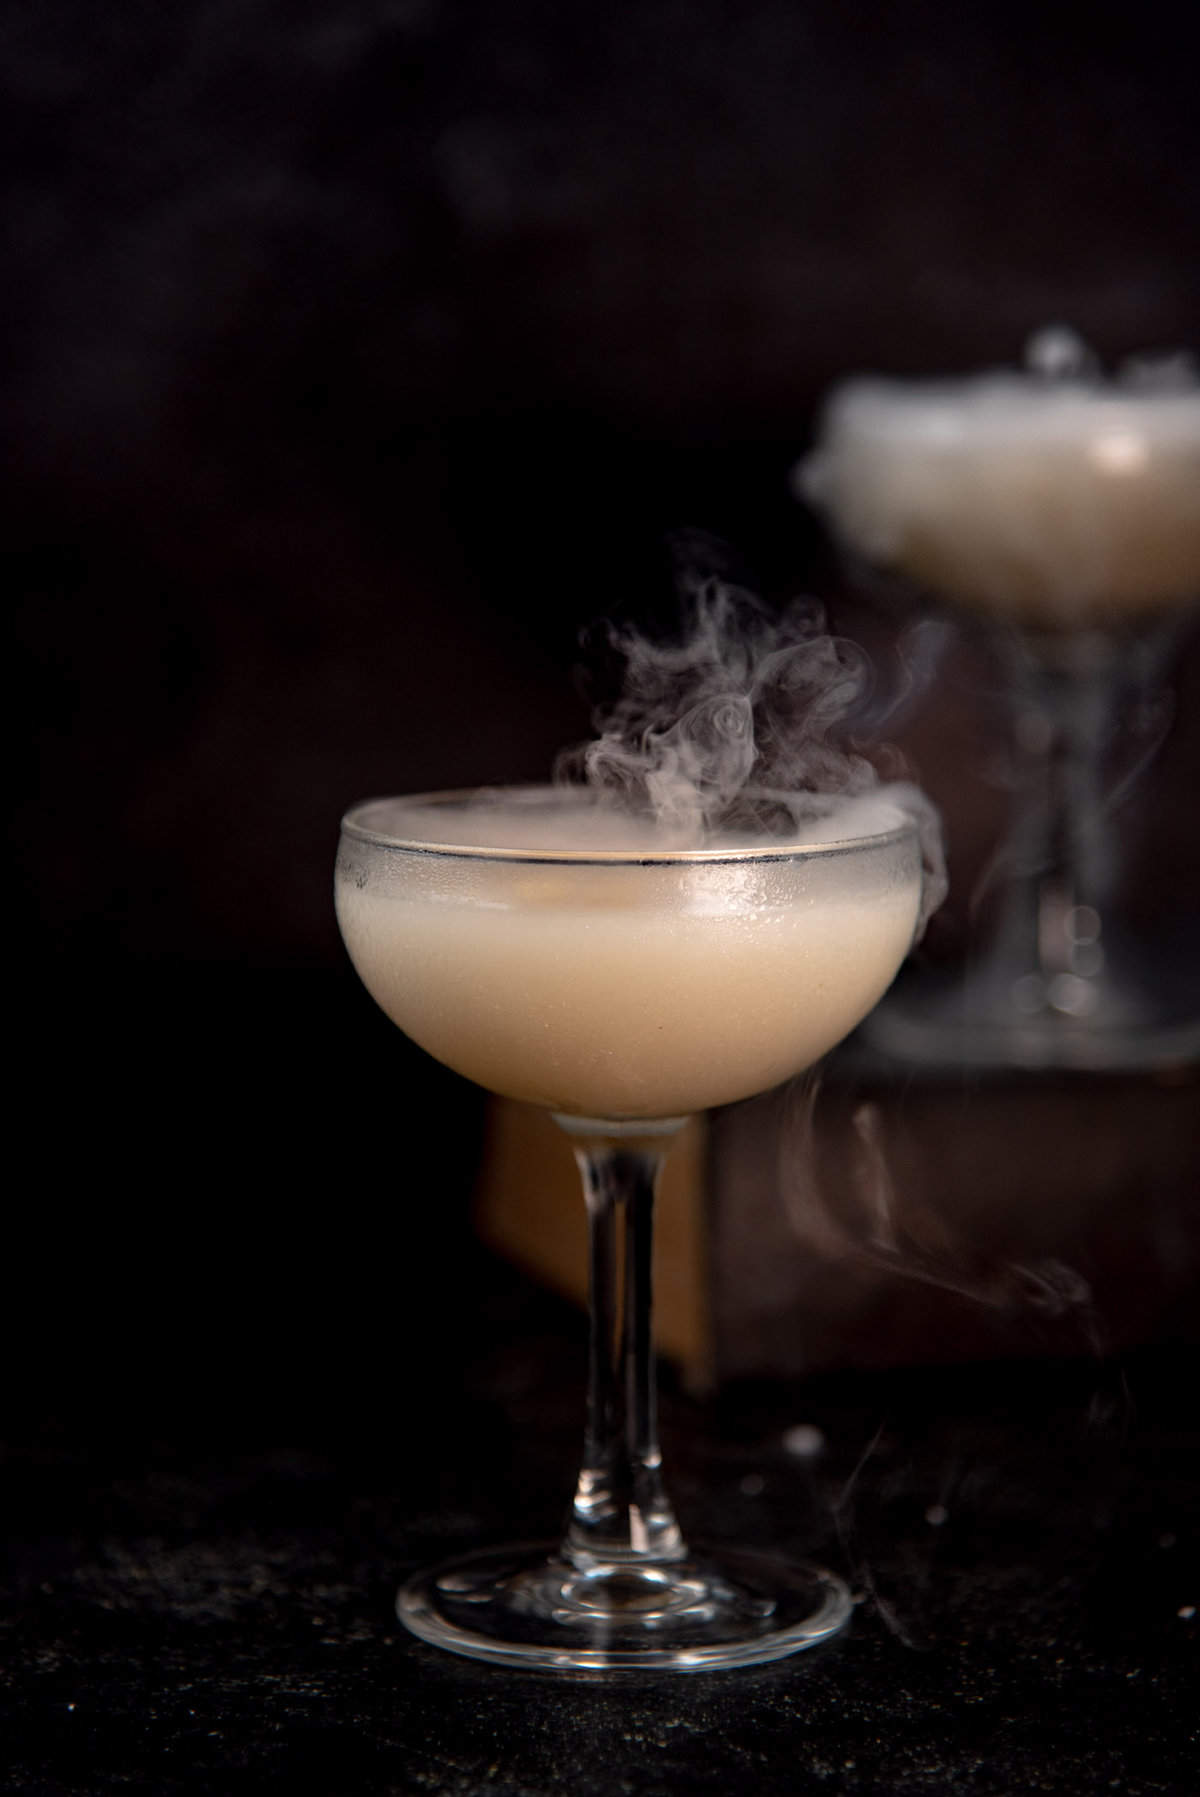 Harry Potter halloween cocktail that is shimmery white silver in color, with smoke coming out of the cocktail.